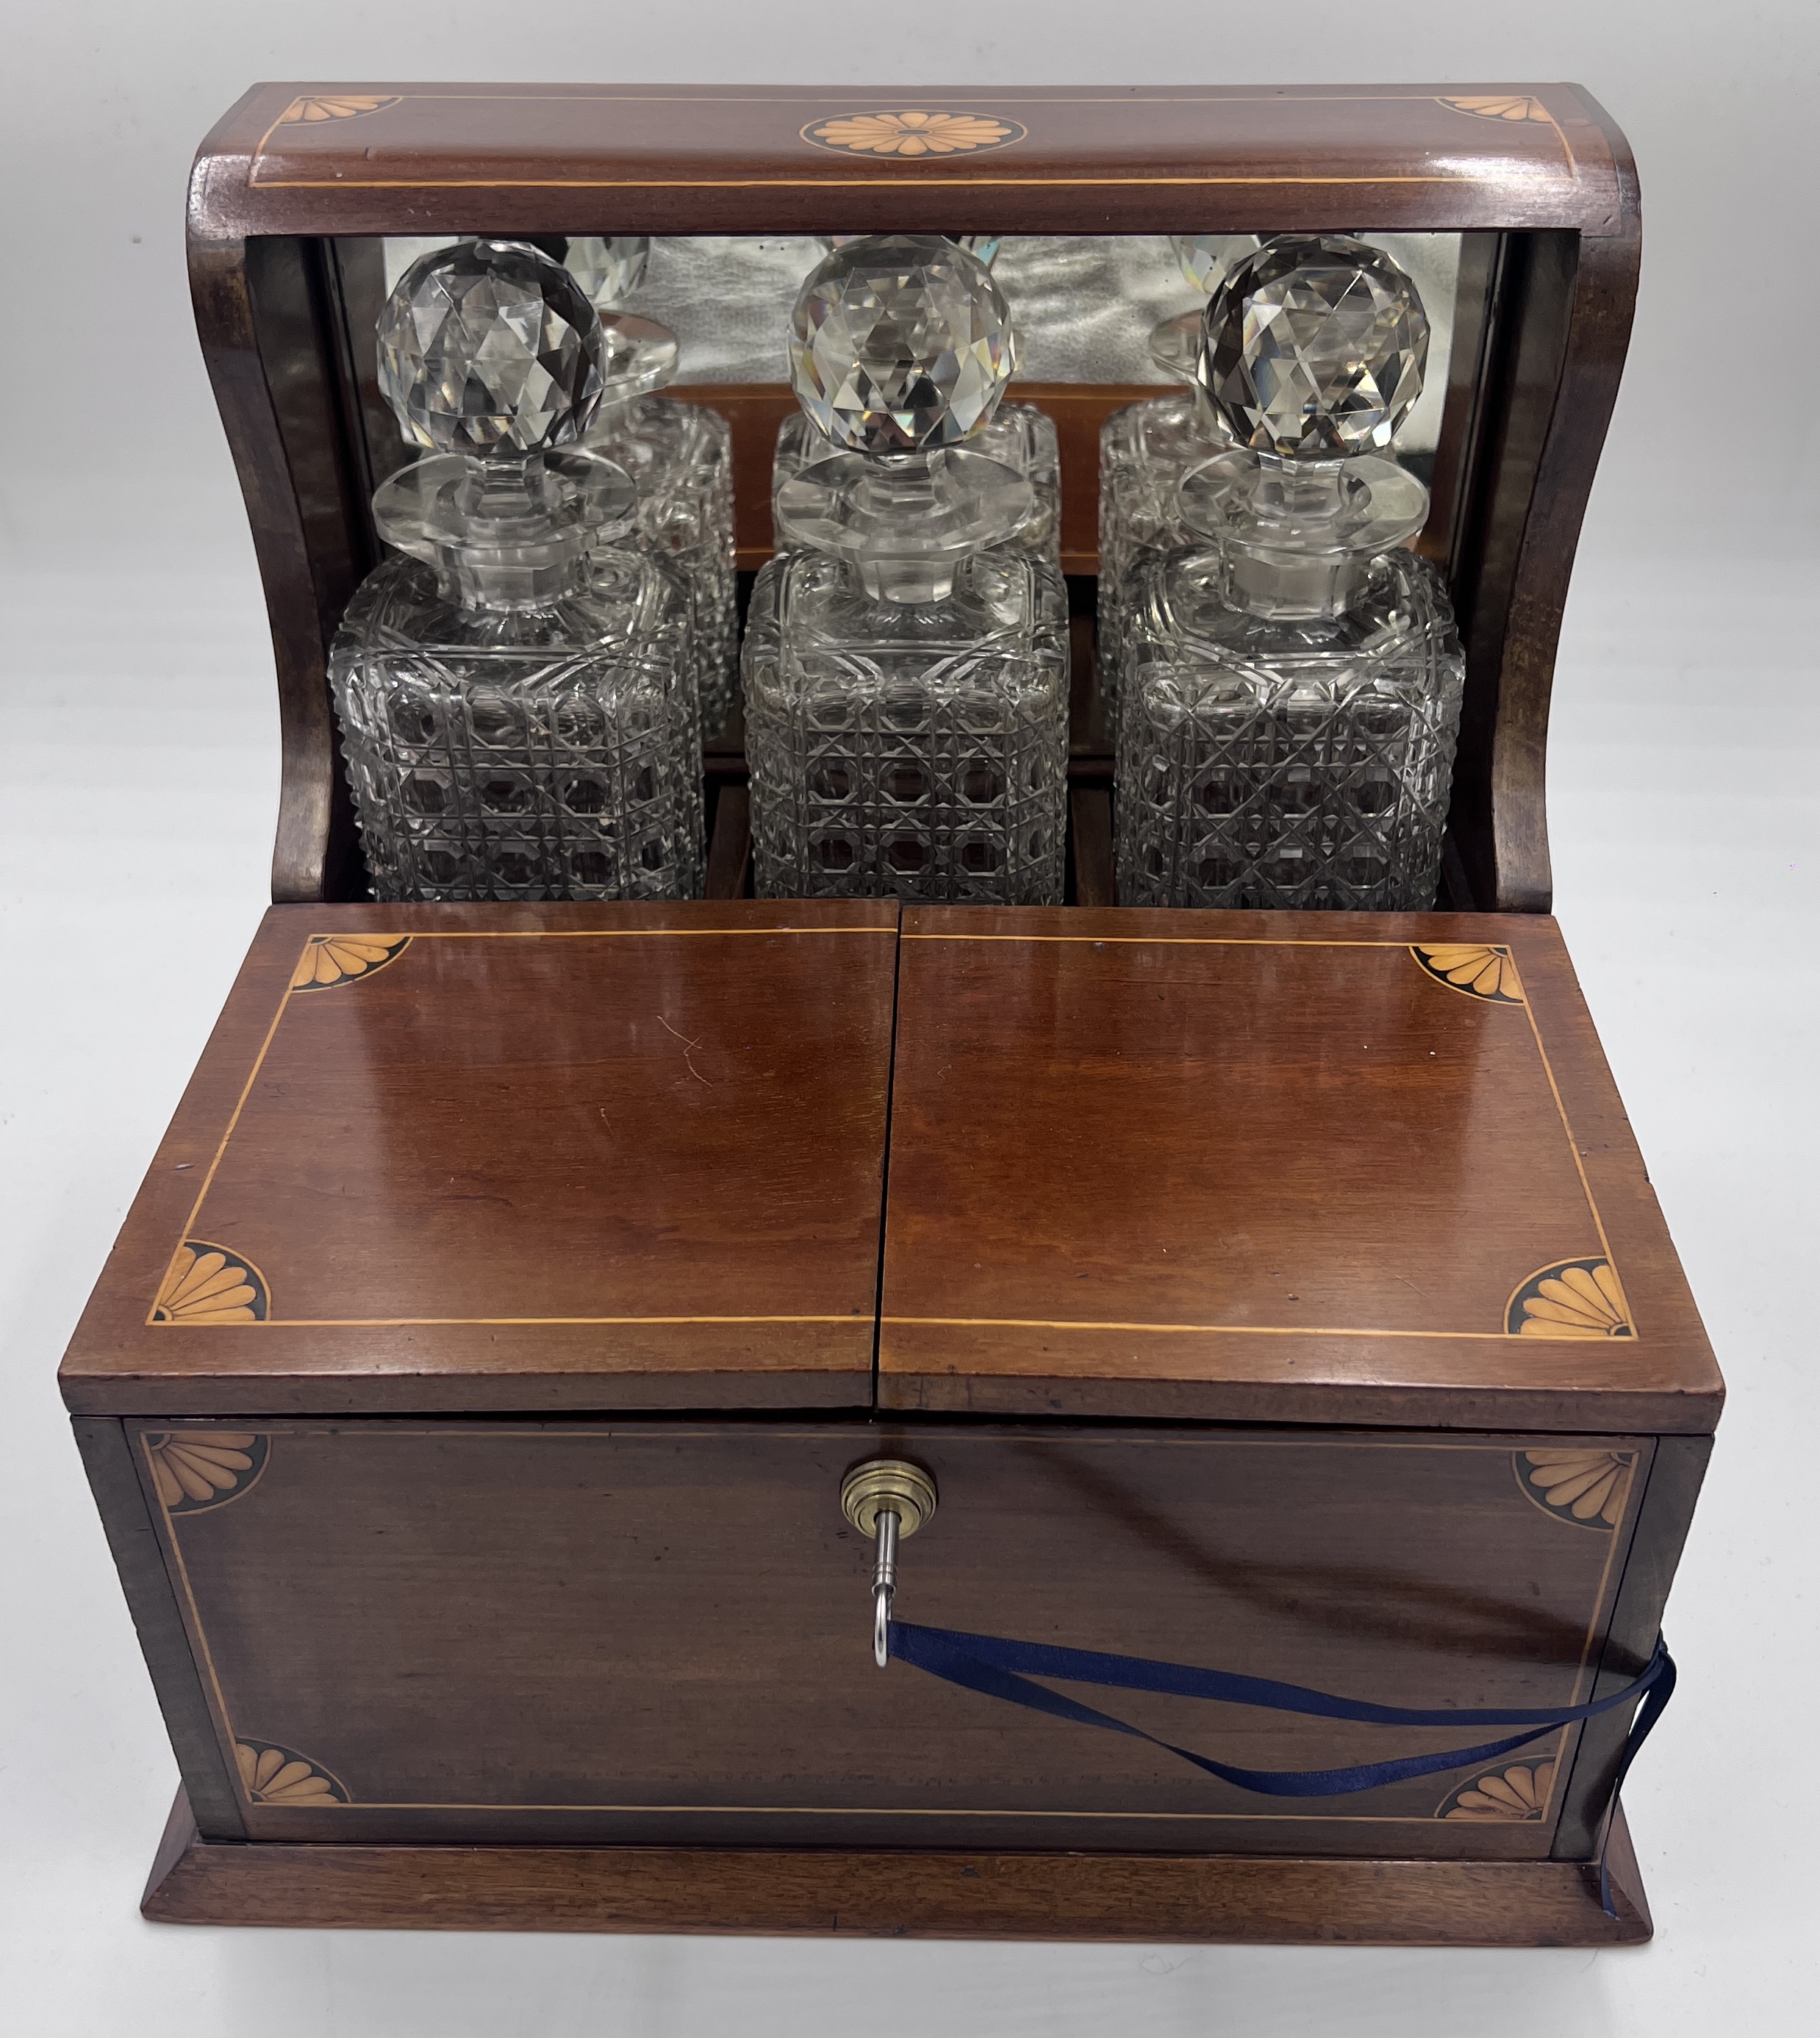 An Edwardian mahogany inlaid cut glass tantalus and games box containing cigar cutter, silver plated - Image 13 of 14